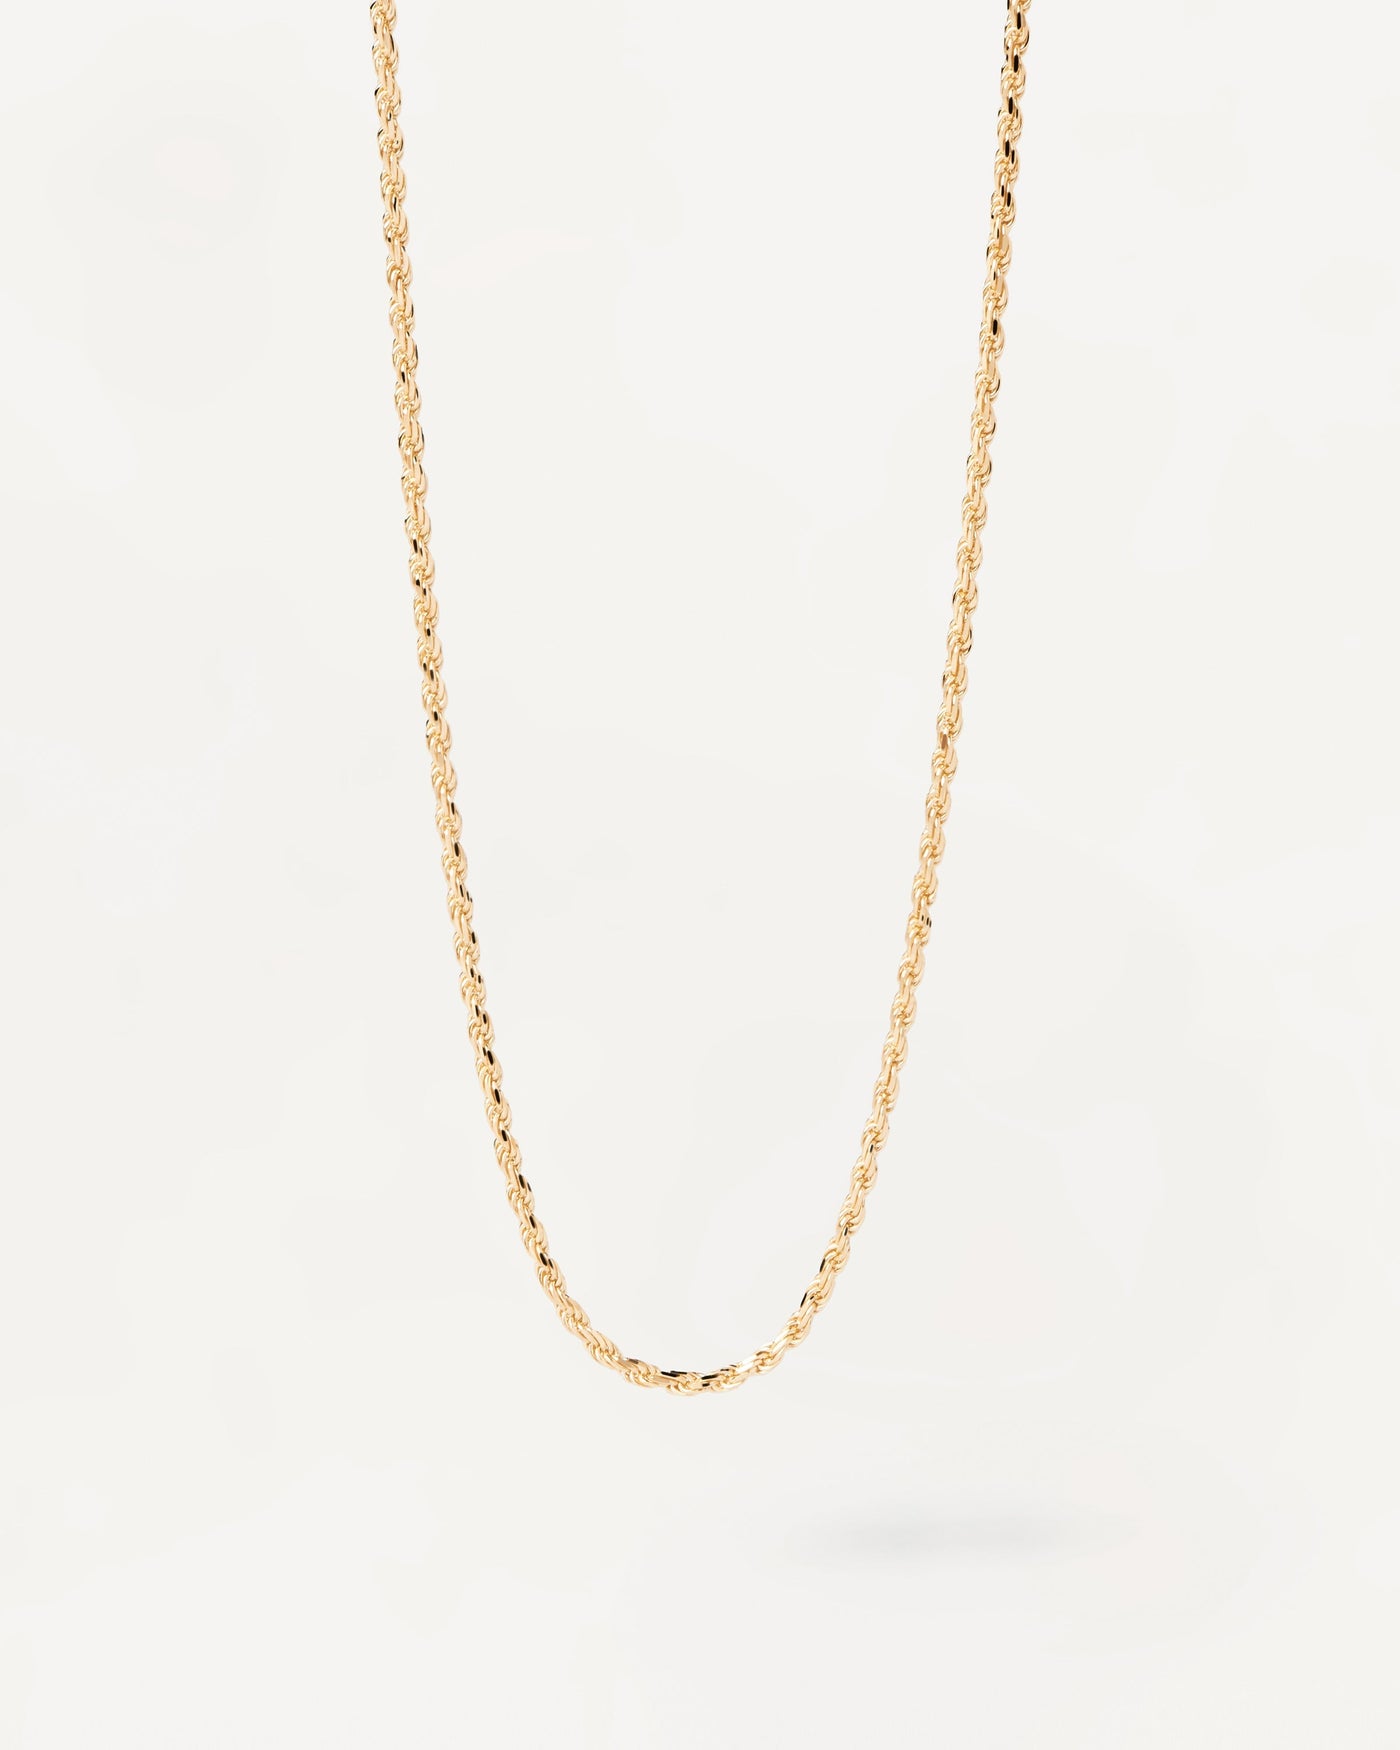 Gold Rope Chain Necklace - PDPAOLA